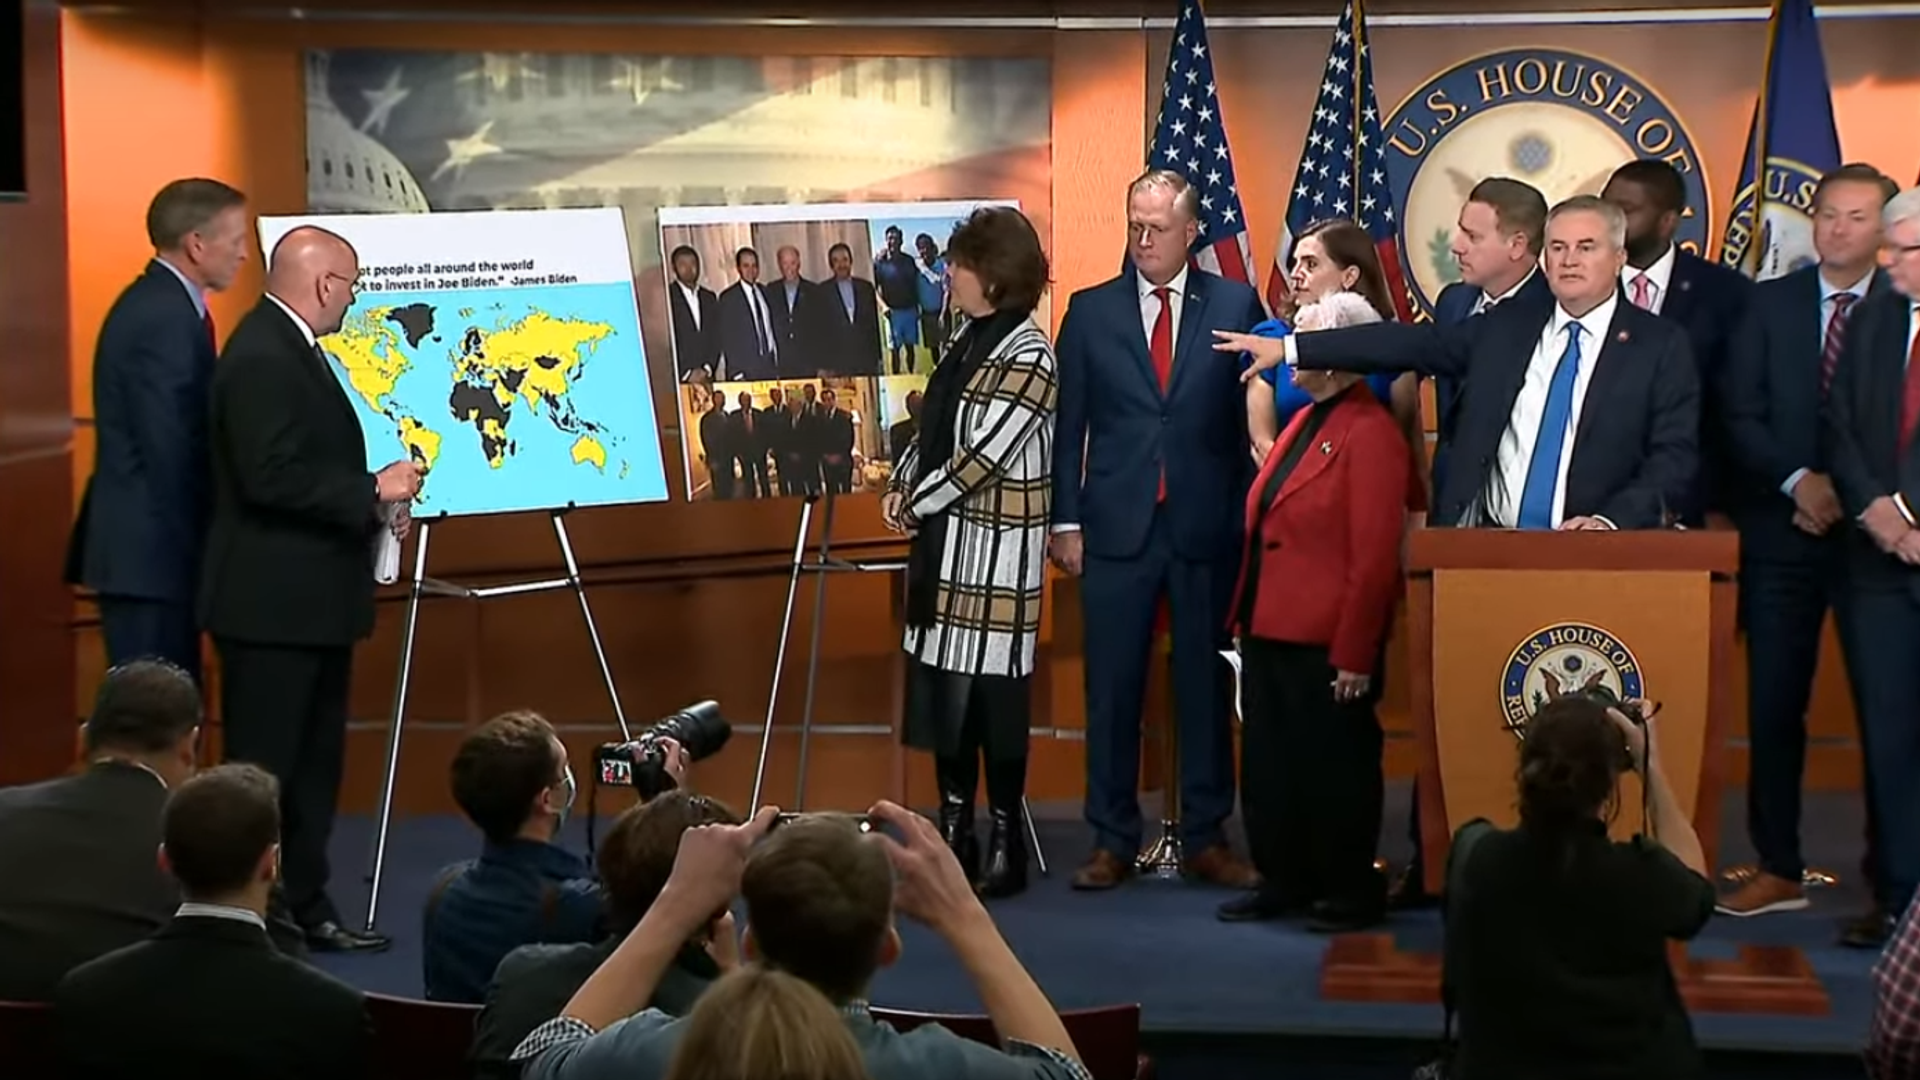 Representative James Comer announces an investigation into the Biden family's alleged illegal business activities in countries around the world. November 17, 2022. Screengrab of House video. - Sputnik International, 1920, 17.11.2022